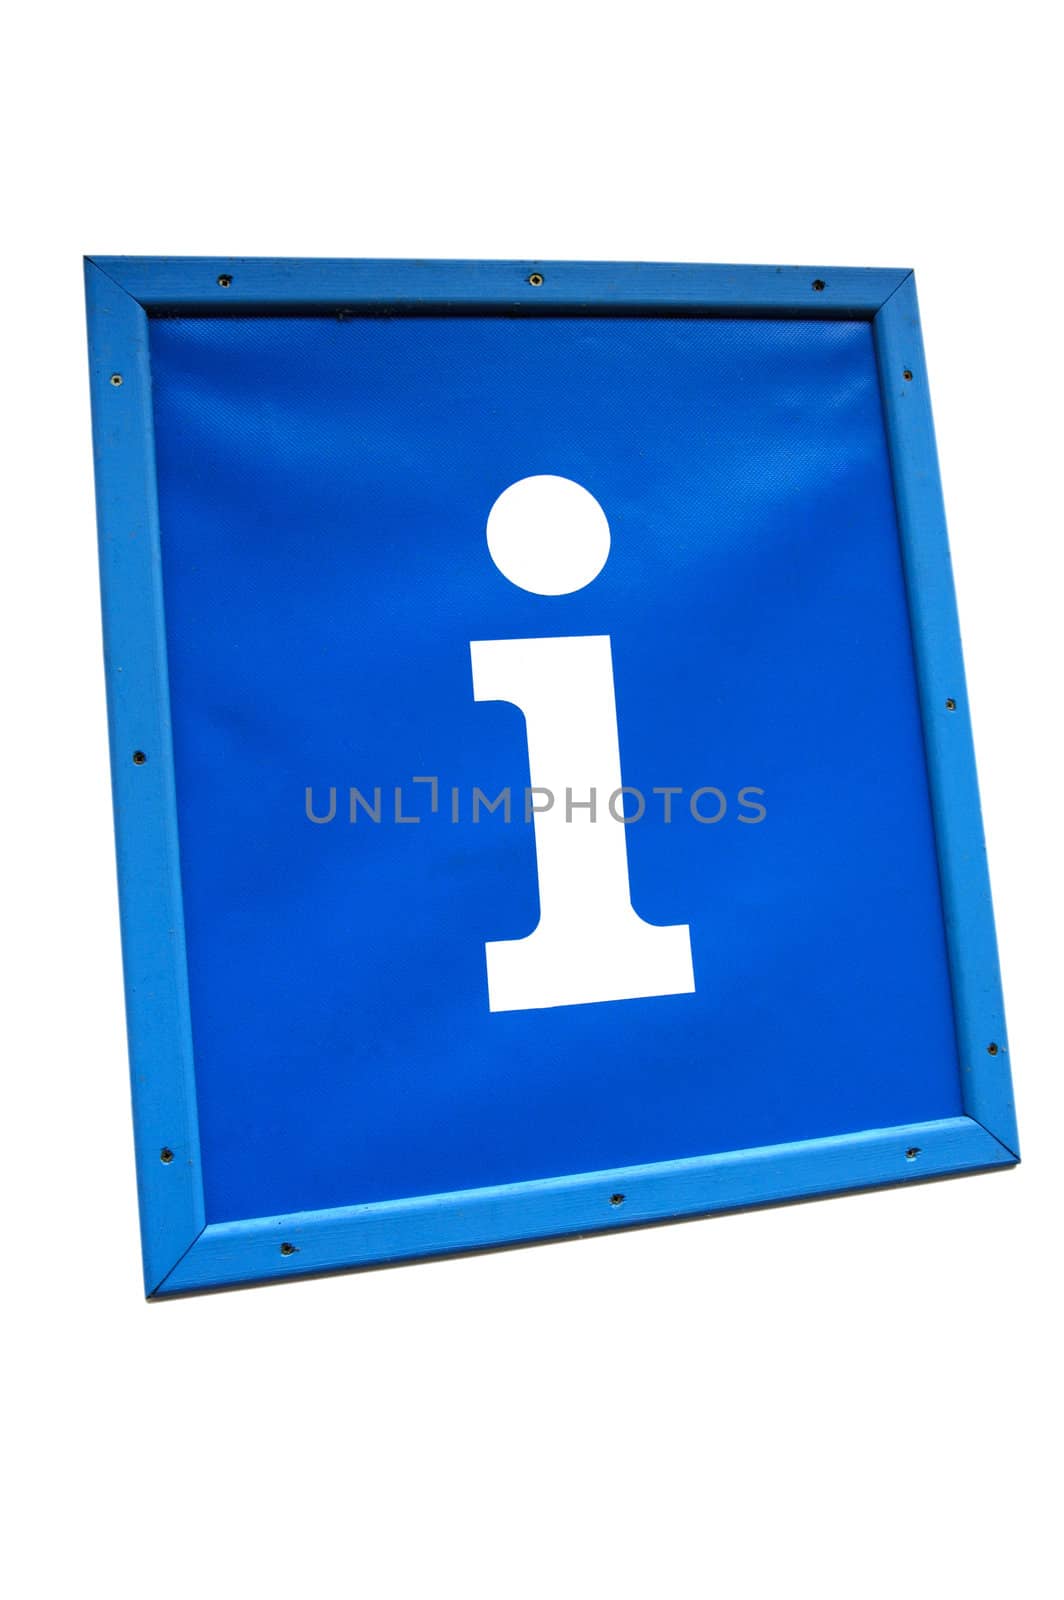 A large sign for an information point, mounted in a wooden frame, ascending diagonal from left to right. (With clipping path.)